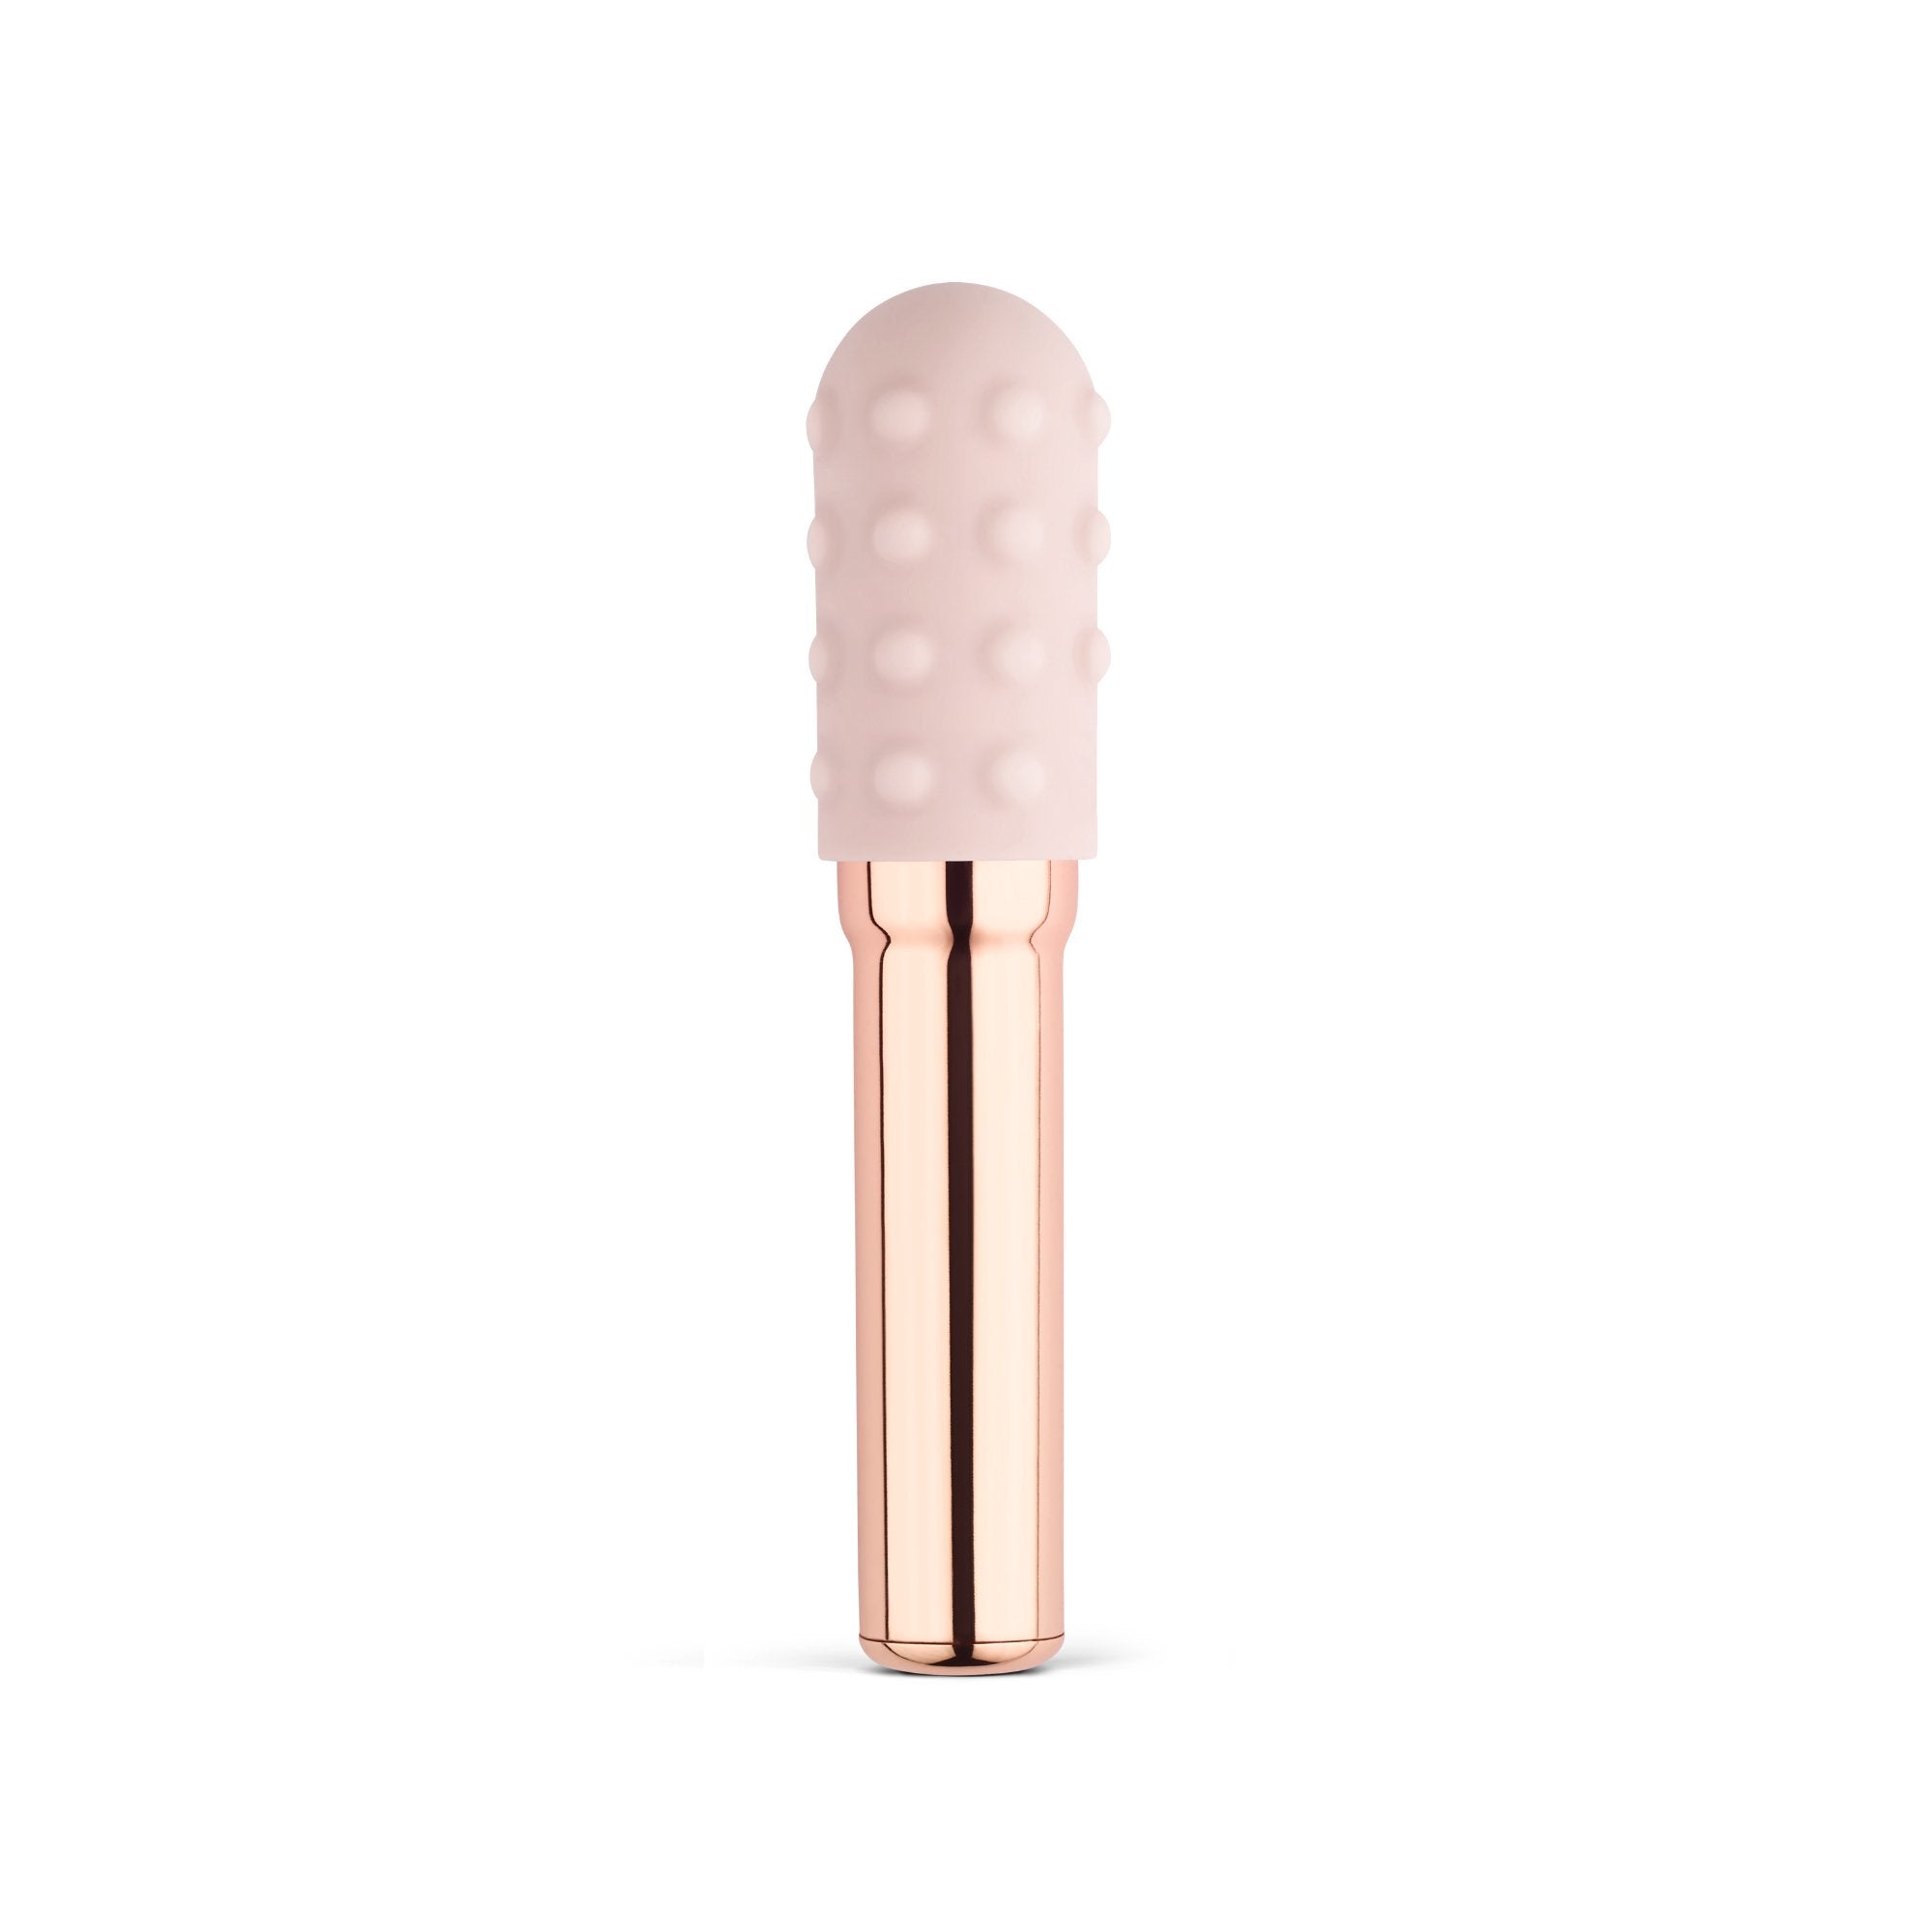 Le Wand Grand Bullet Rose Gold - The Cowgirl Sex Machine